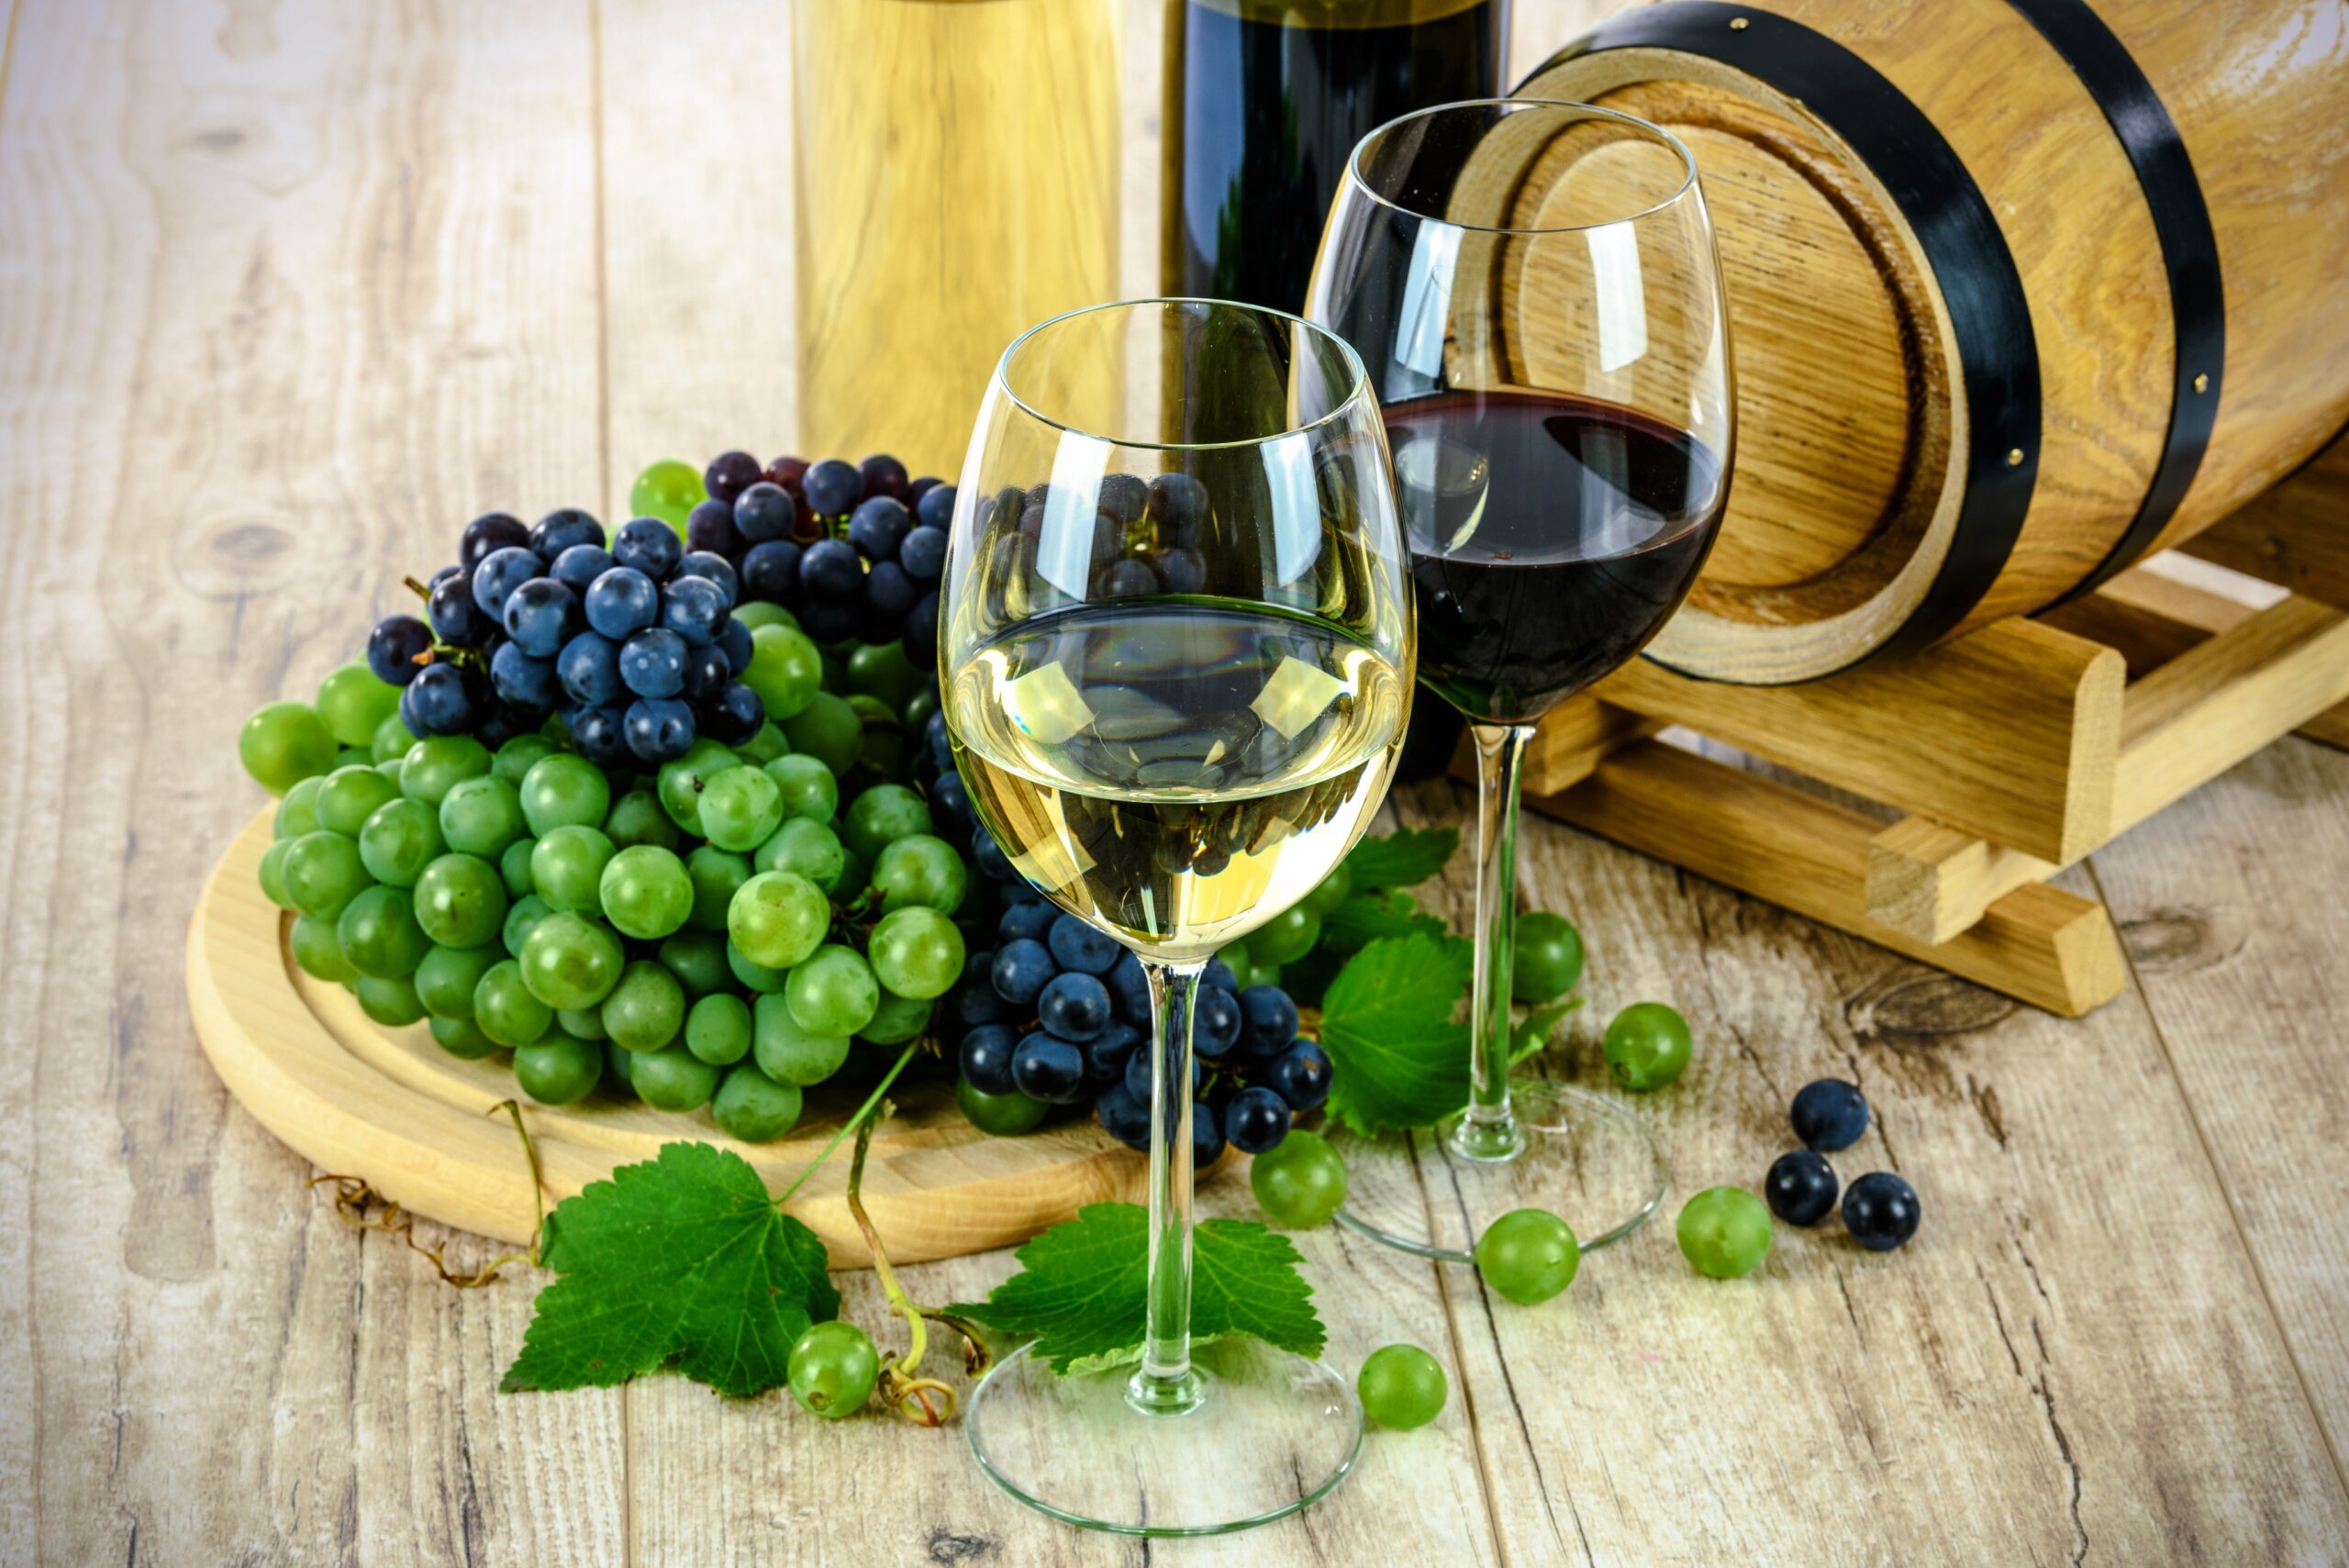 French wine, barrel and grapes